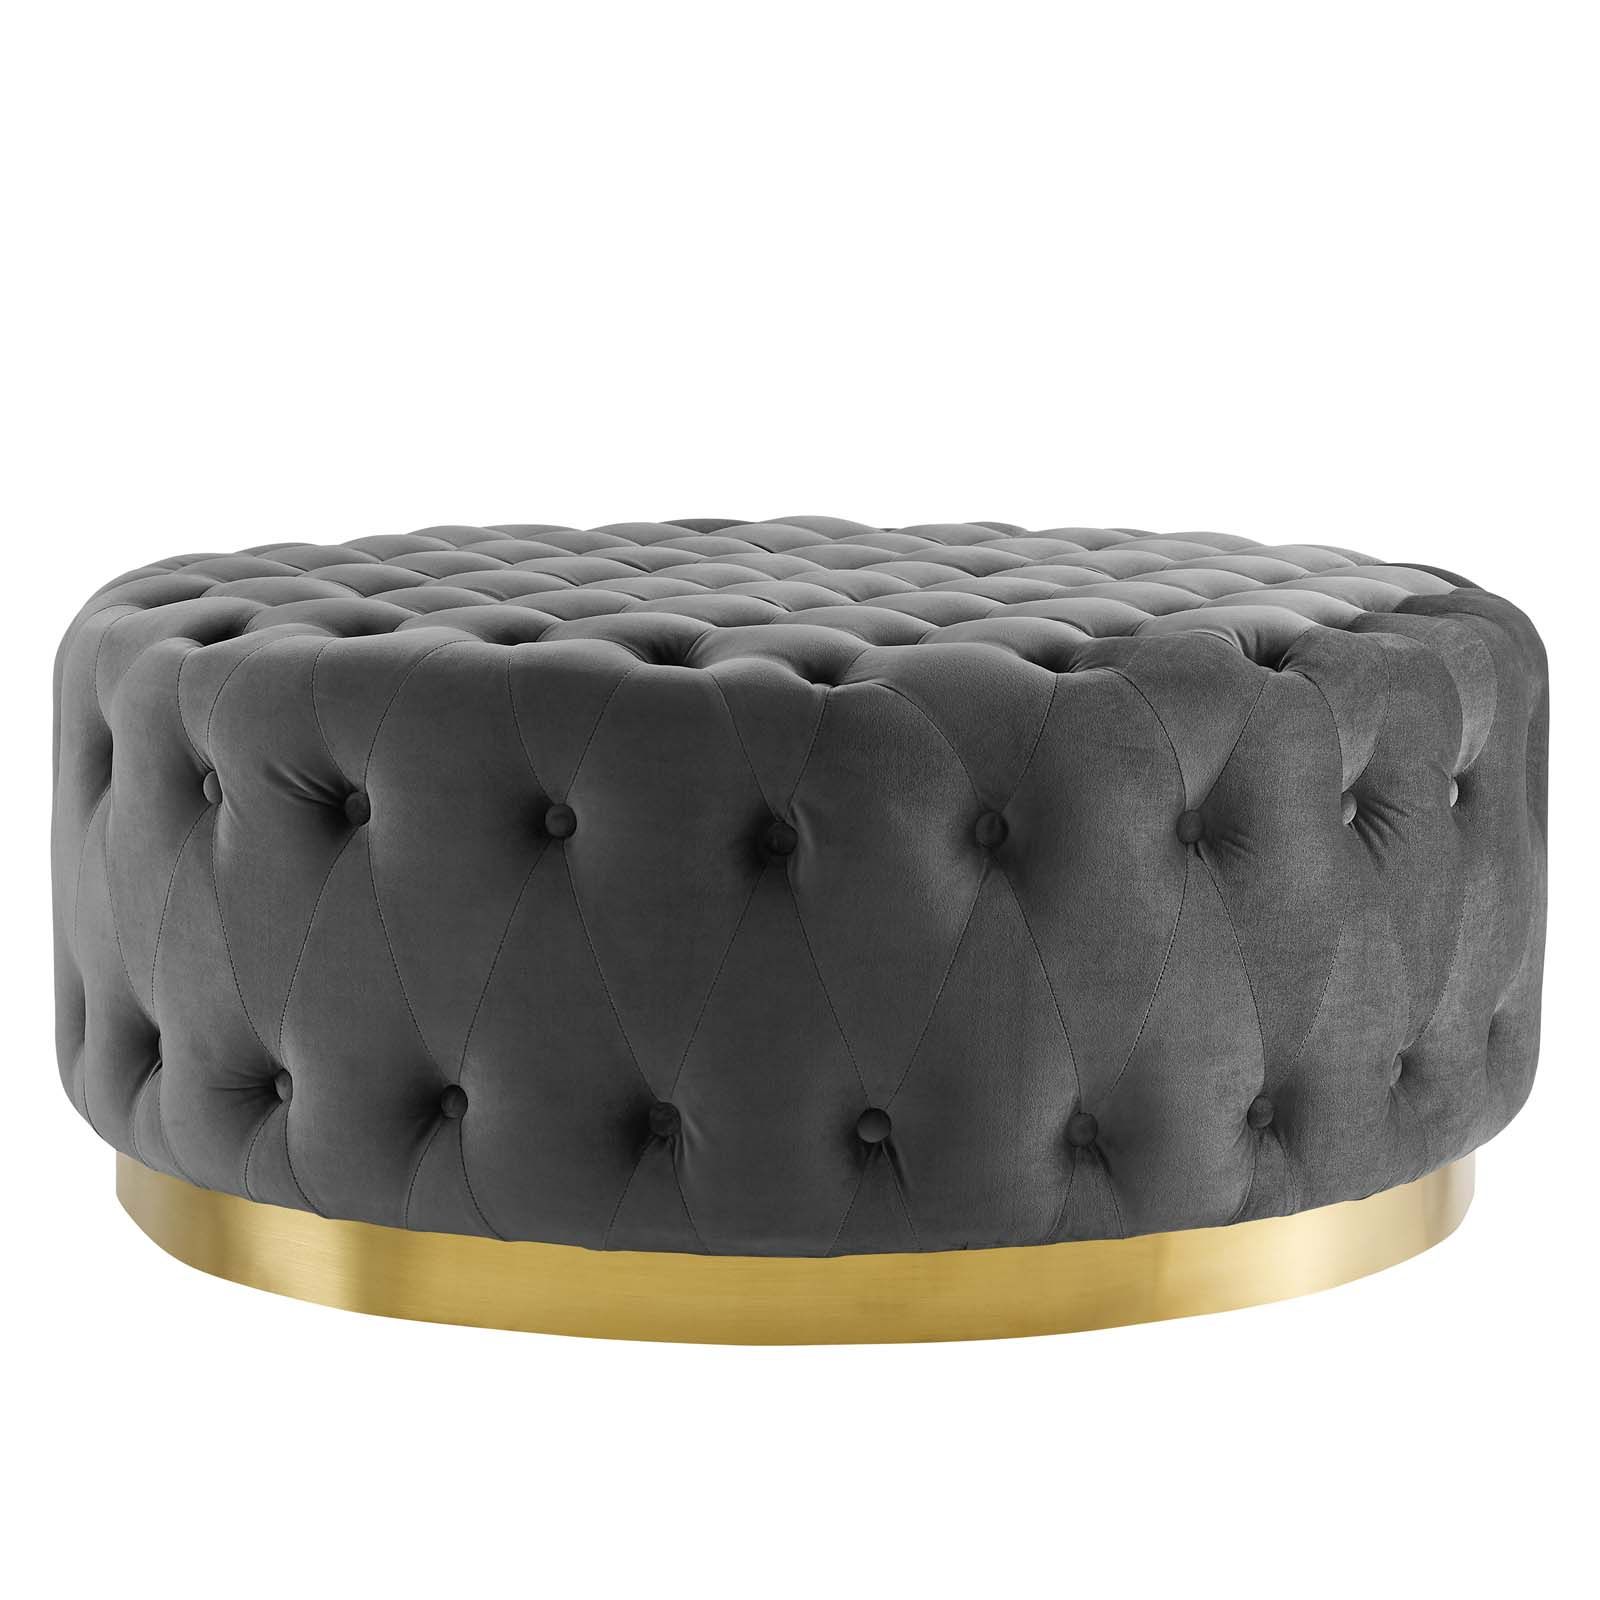 Gray Wool Pouf Ottomans In Well Known Ensconce Tufted Performance Velvet Round Ottoman Gray (View 9 of 10)